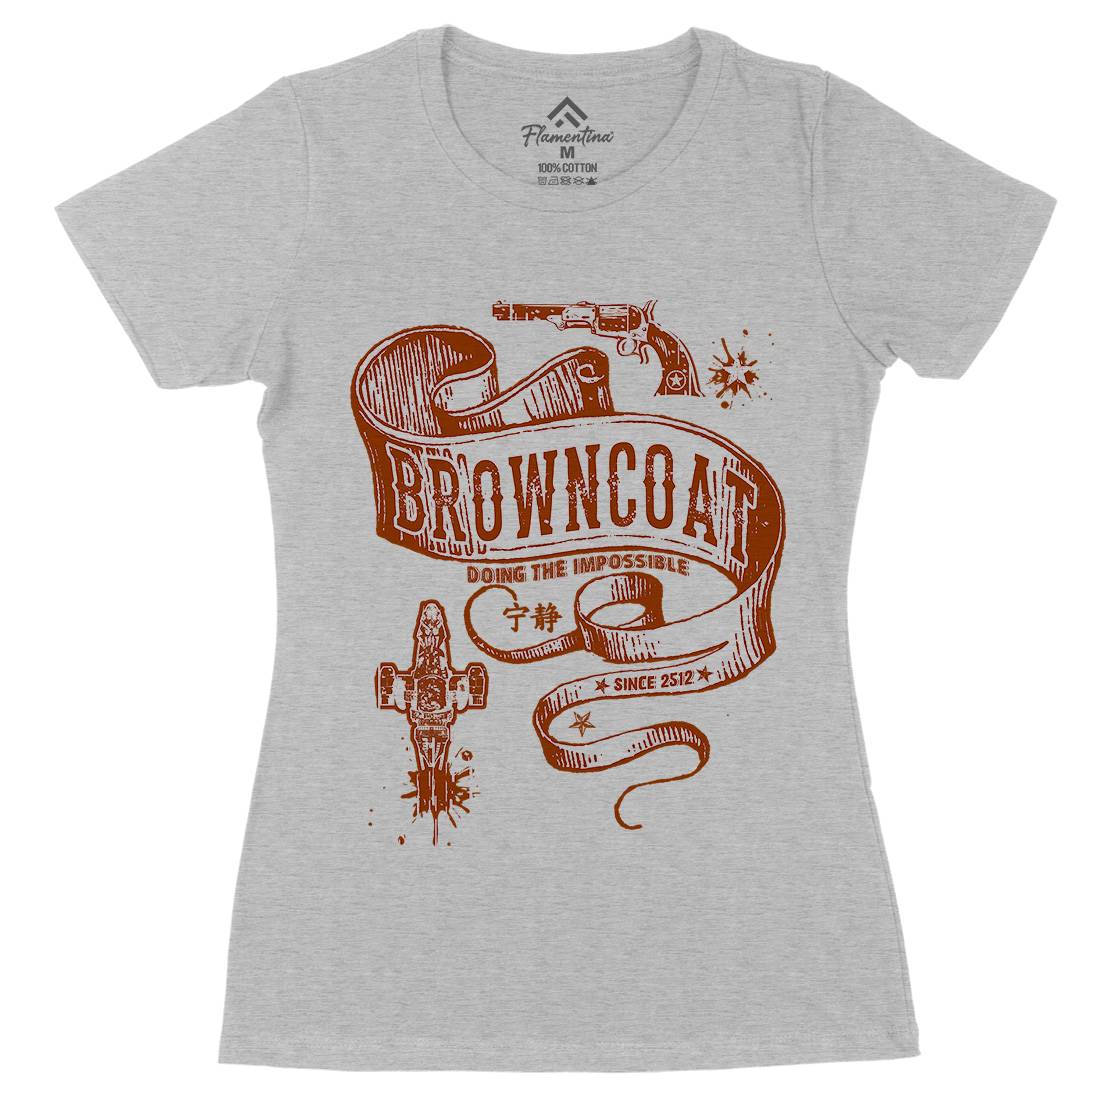 Browncoat Womens Organic Crew Neck T-Shirt Space D283